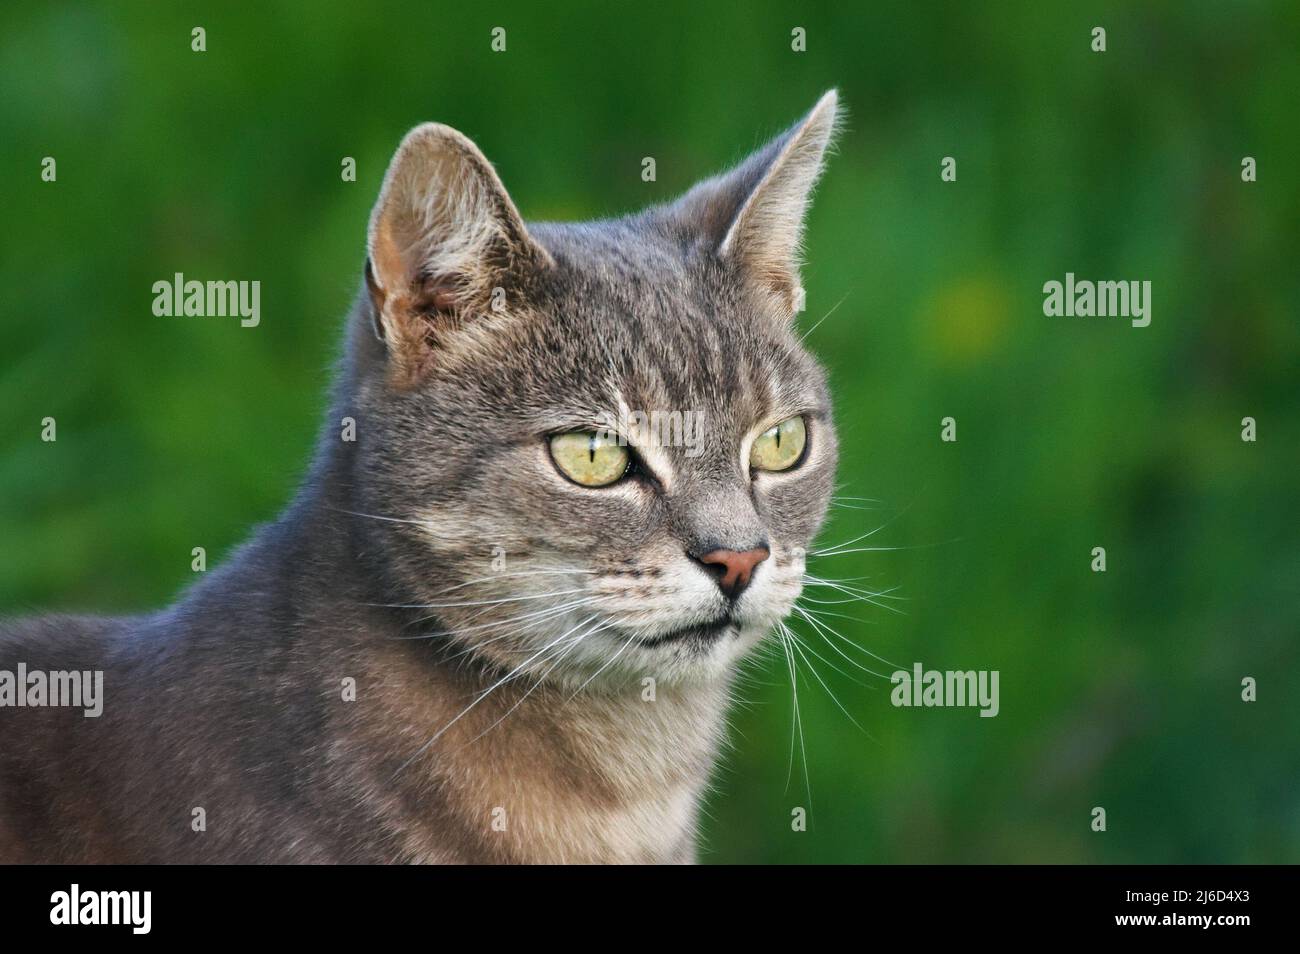 Portrait of a beautiful shorthaired tabby cat with green eyes on a defocused grass background. Stock Photo